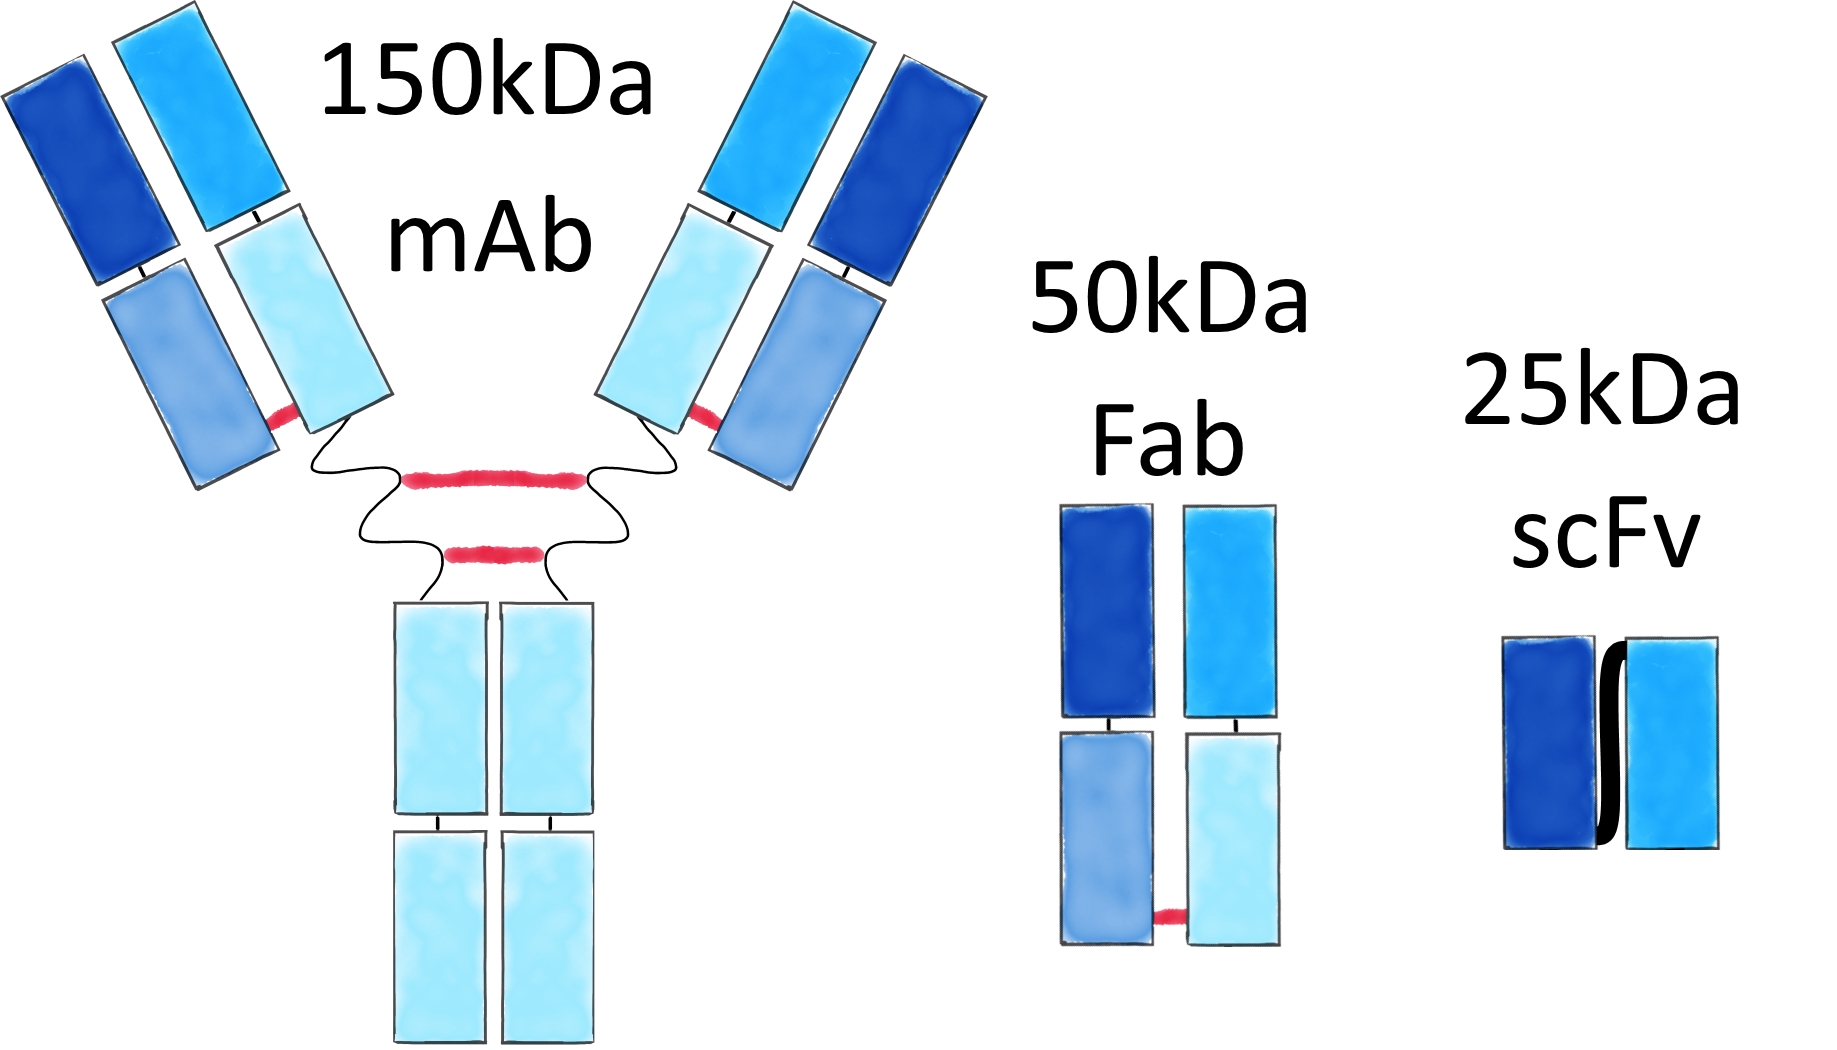 Diagram showing a size and structure comparison of mAb, Fab and scFv